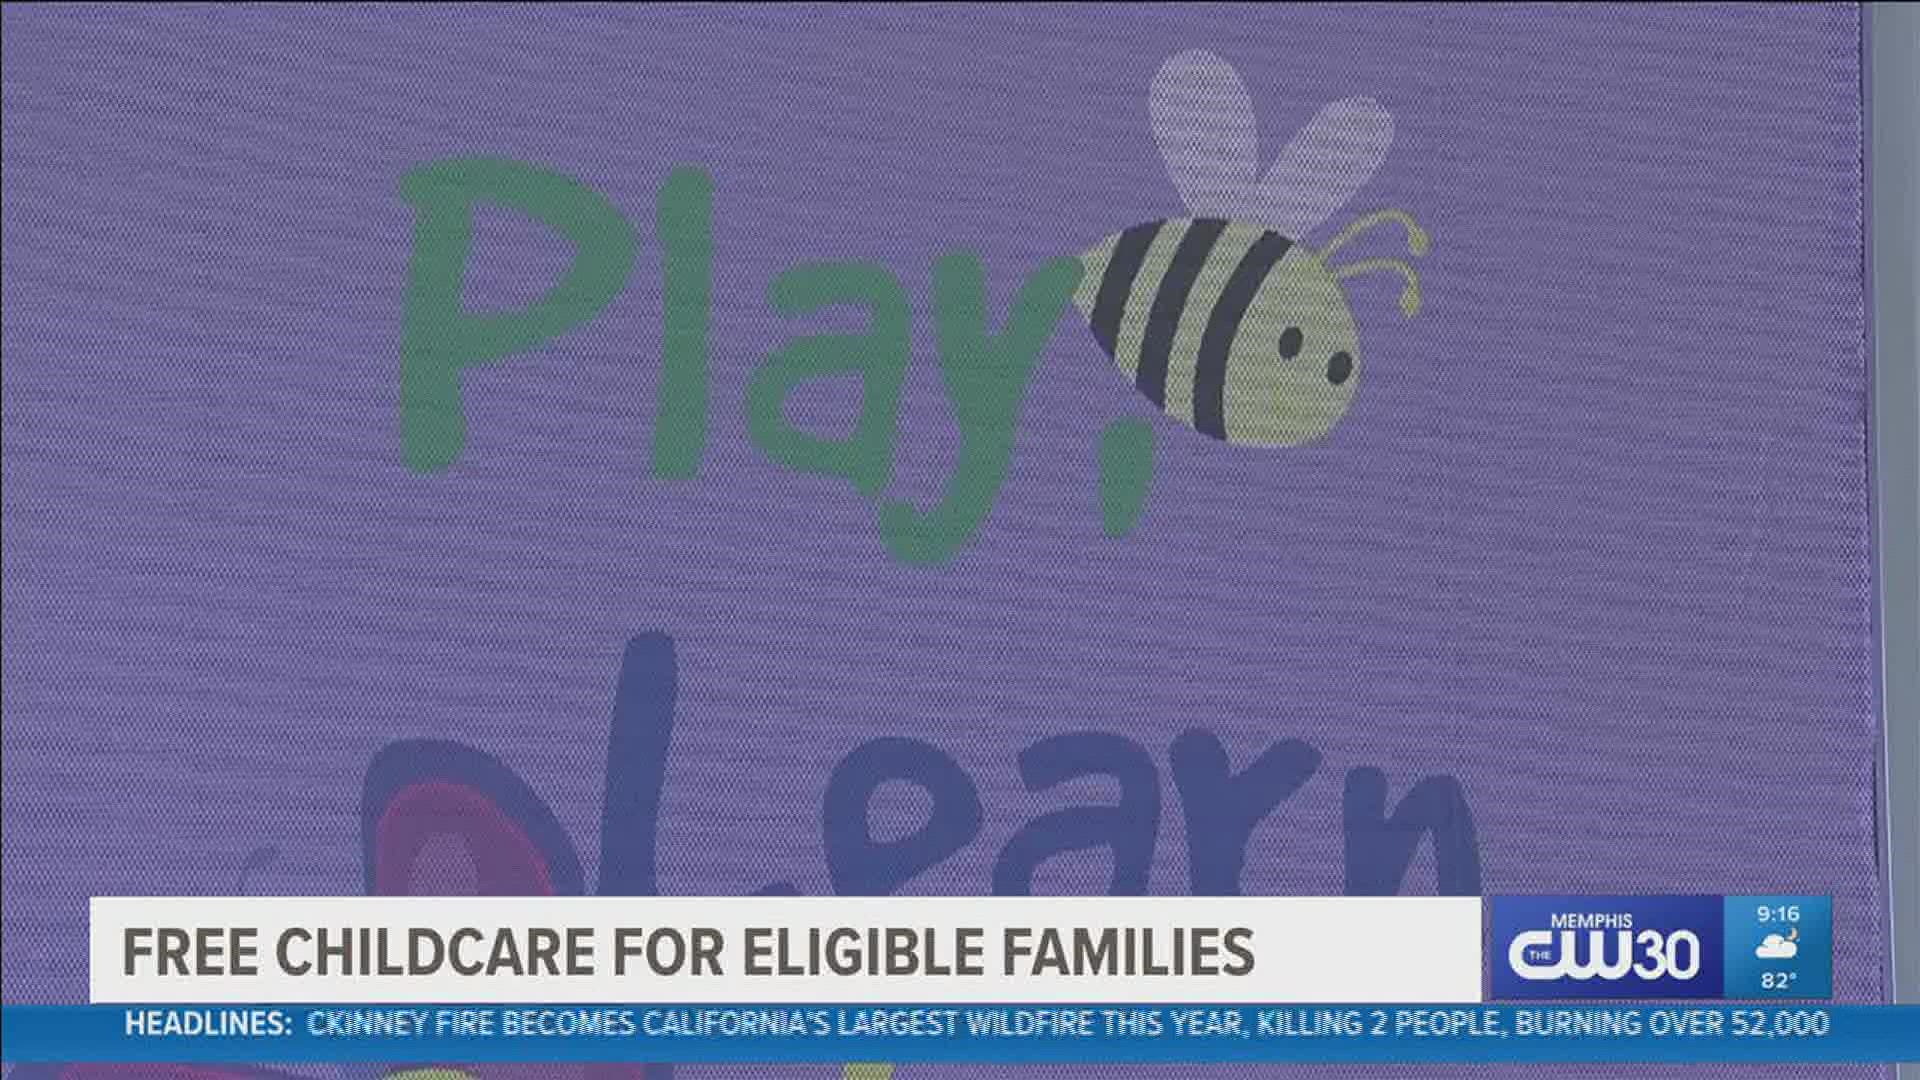 From Aug. 1 through Dec. 31, 2022, childcare is free for eligible families. Here's how to apply.